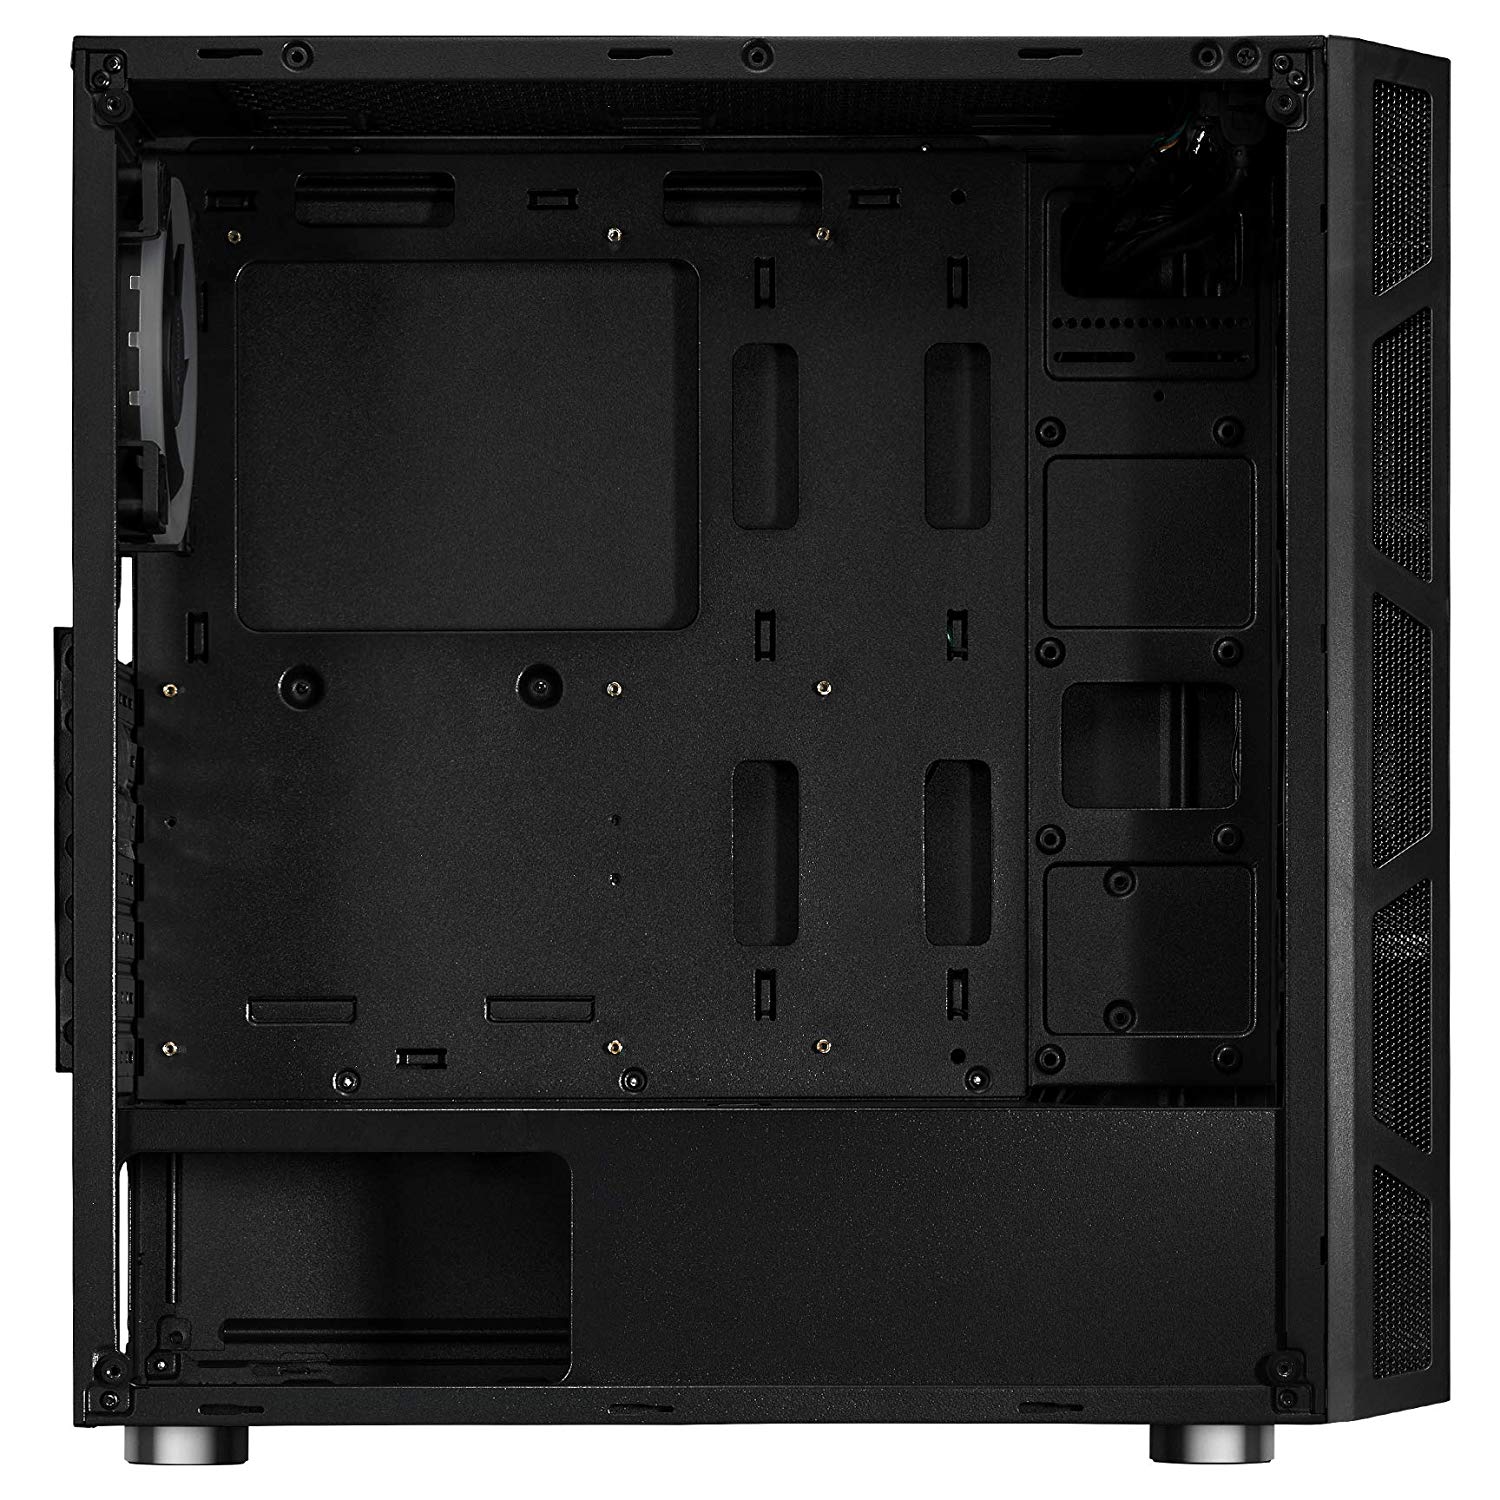 SPECTRA C100 PC Gaming Computer Case with Blue LED Fans